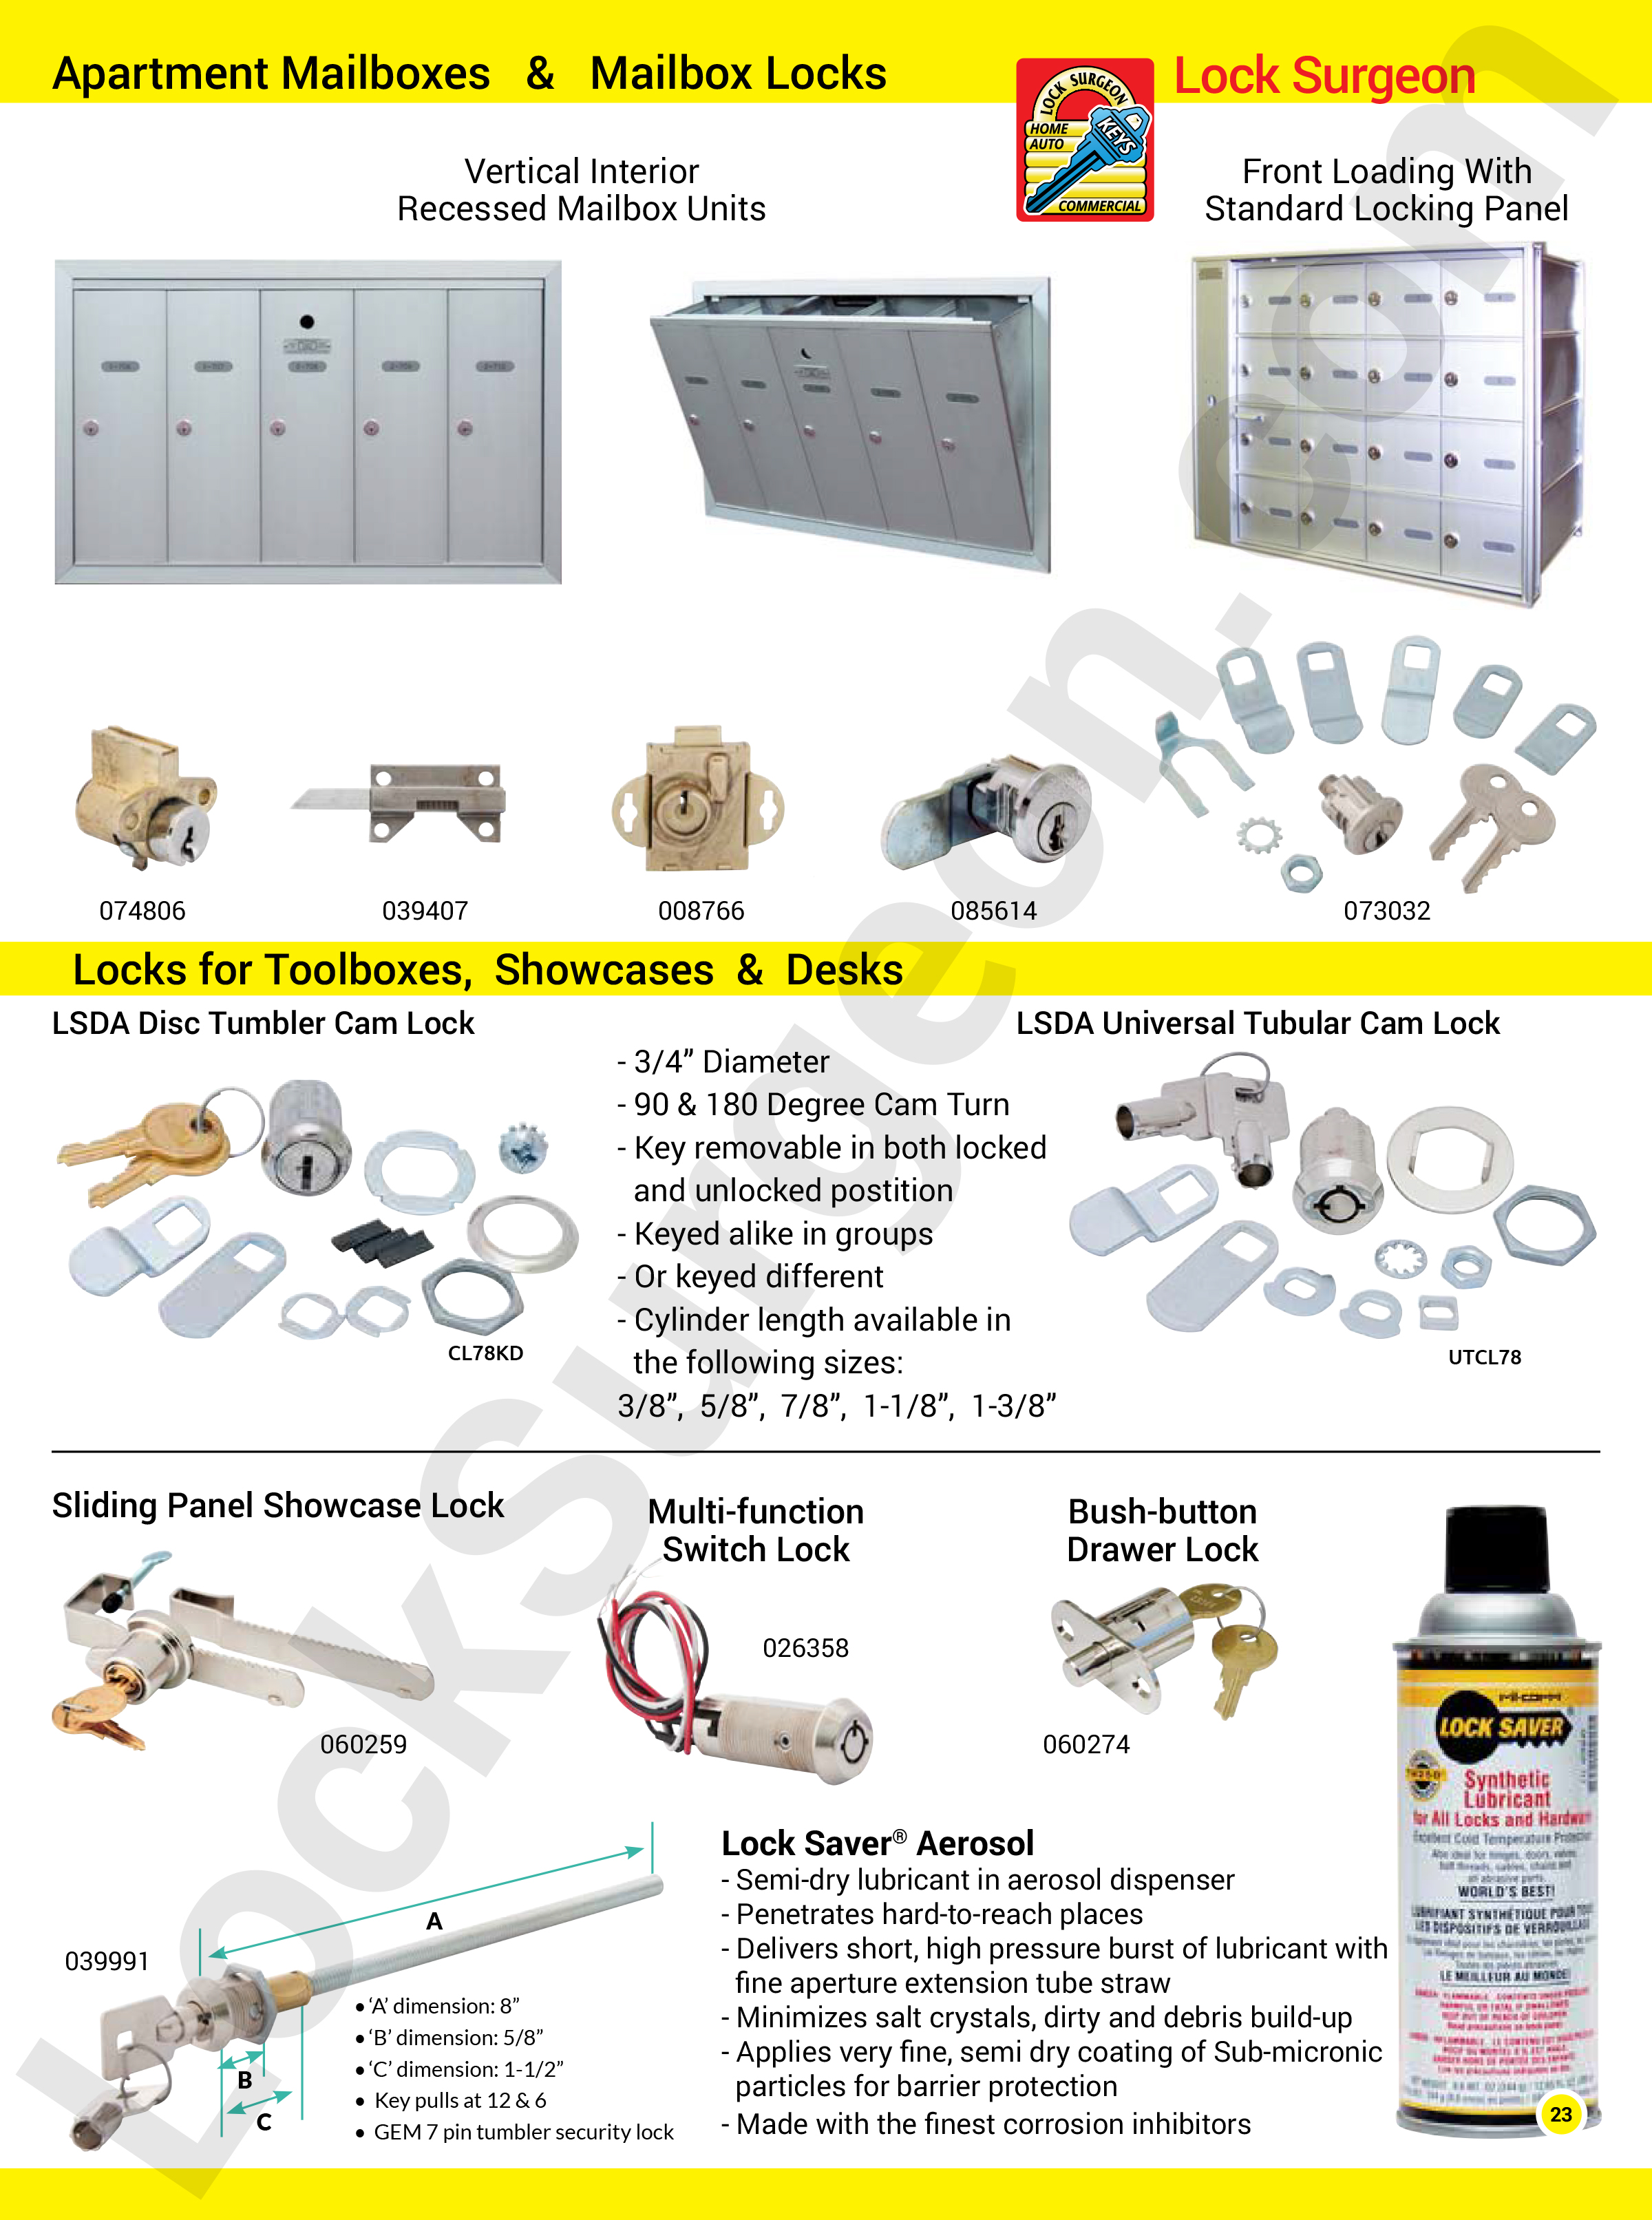 Lock Surgeon carry vertical interior recessed mailbox units front loading standard locking panel.